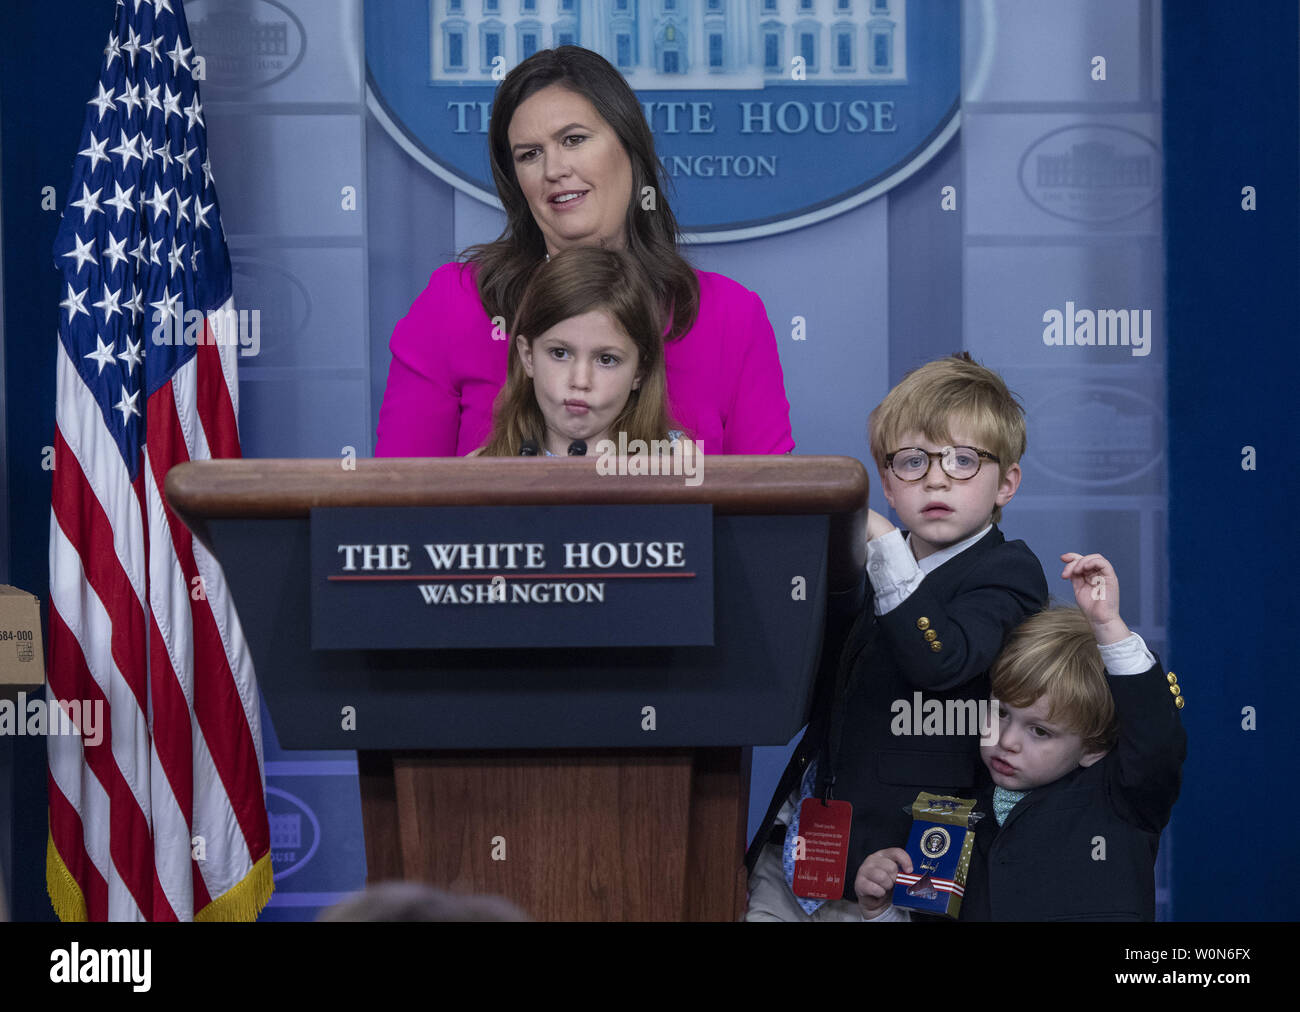 White House Press Secretary Sarah Huckabee Sanders, upper center, with her daughter Scarlett, center, and sons Huck, right, and George, lower right, takes questions from children and journalists in observance of “Take Our Daughters and Sons to Work Day” in the Brady Press Briefing Room of the White House in Washington, DC on April 25, 2019. Photo by Ron Sachs/UPI Stock Photo